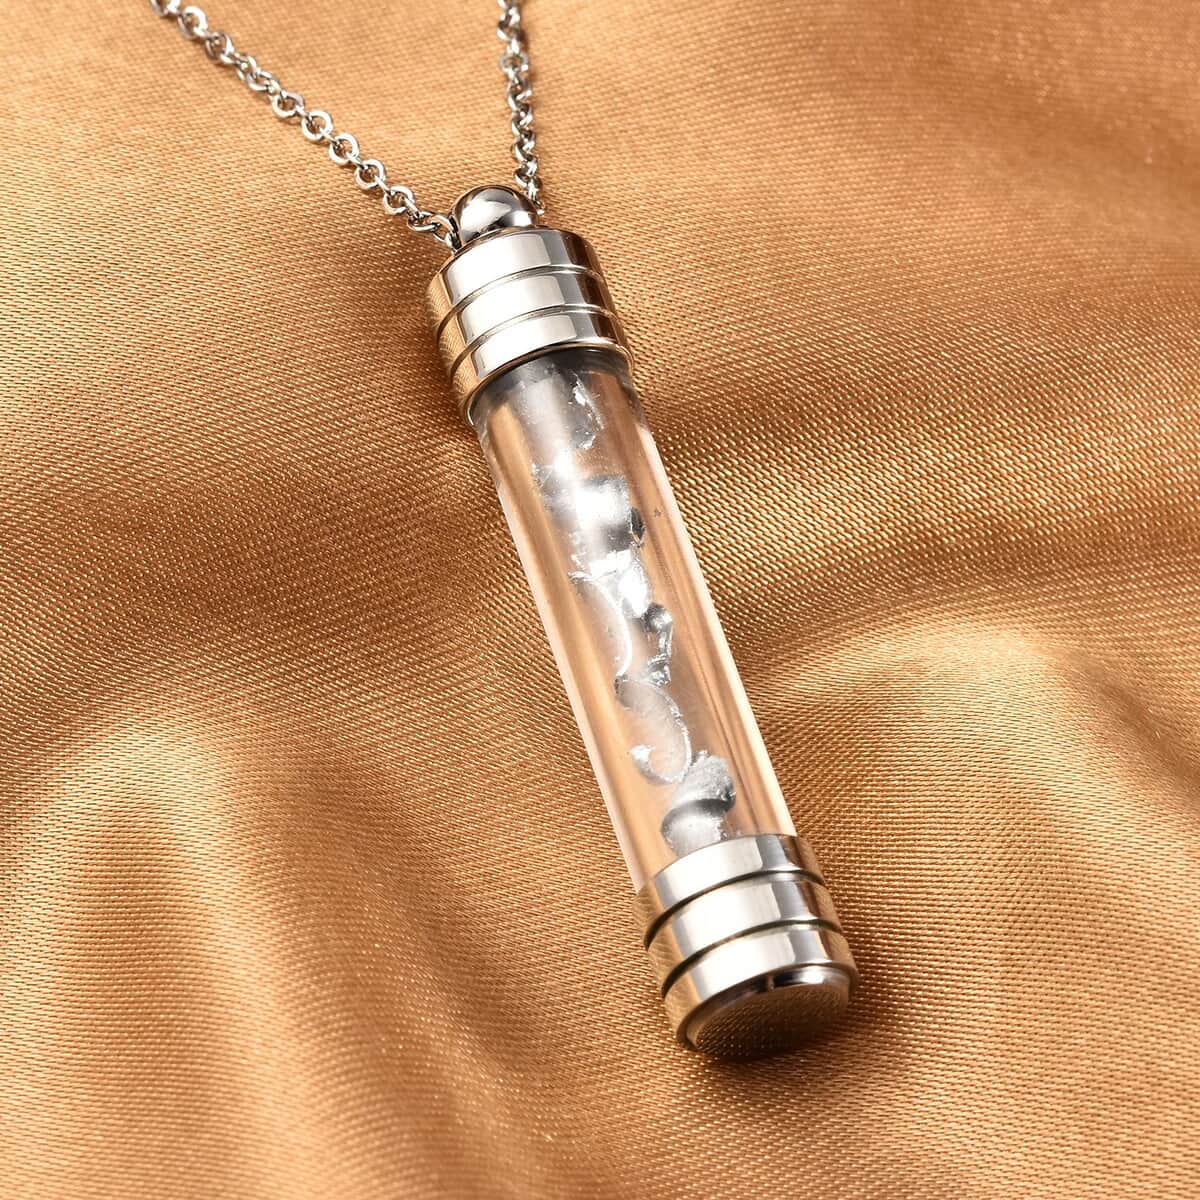 Marvelous Meteorite Pendant Necklace in Stainless Steel, Glass  Vile Pendant For Women (20 Inches) image number 1